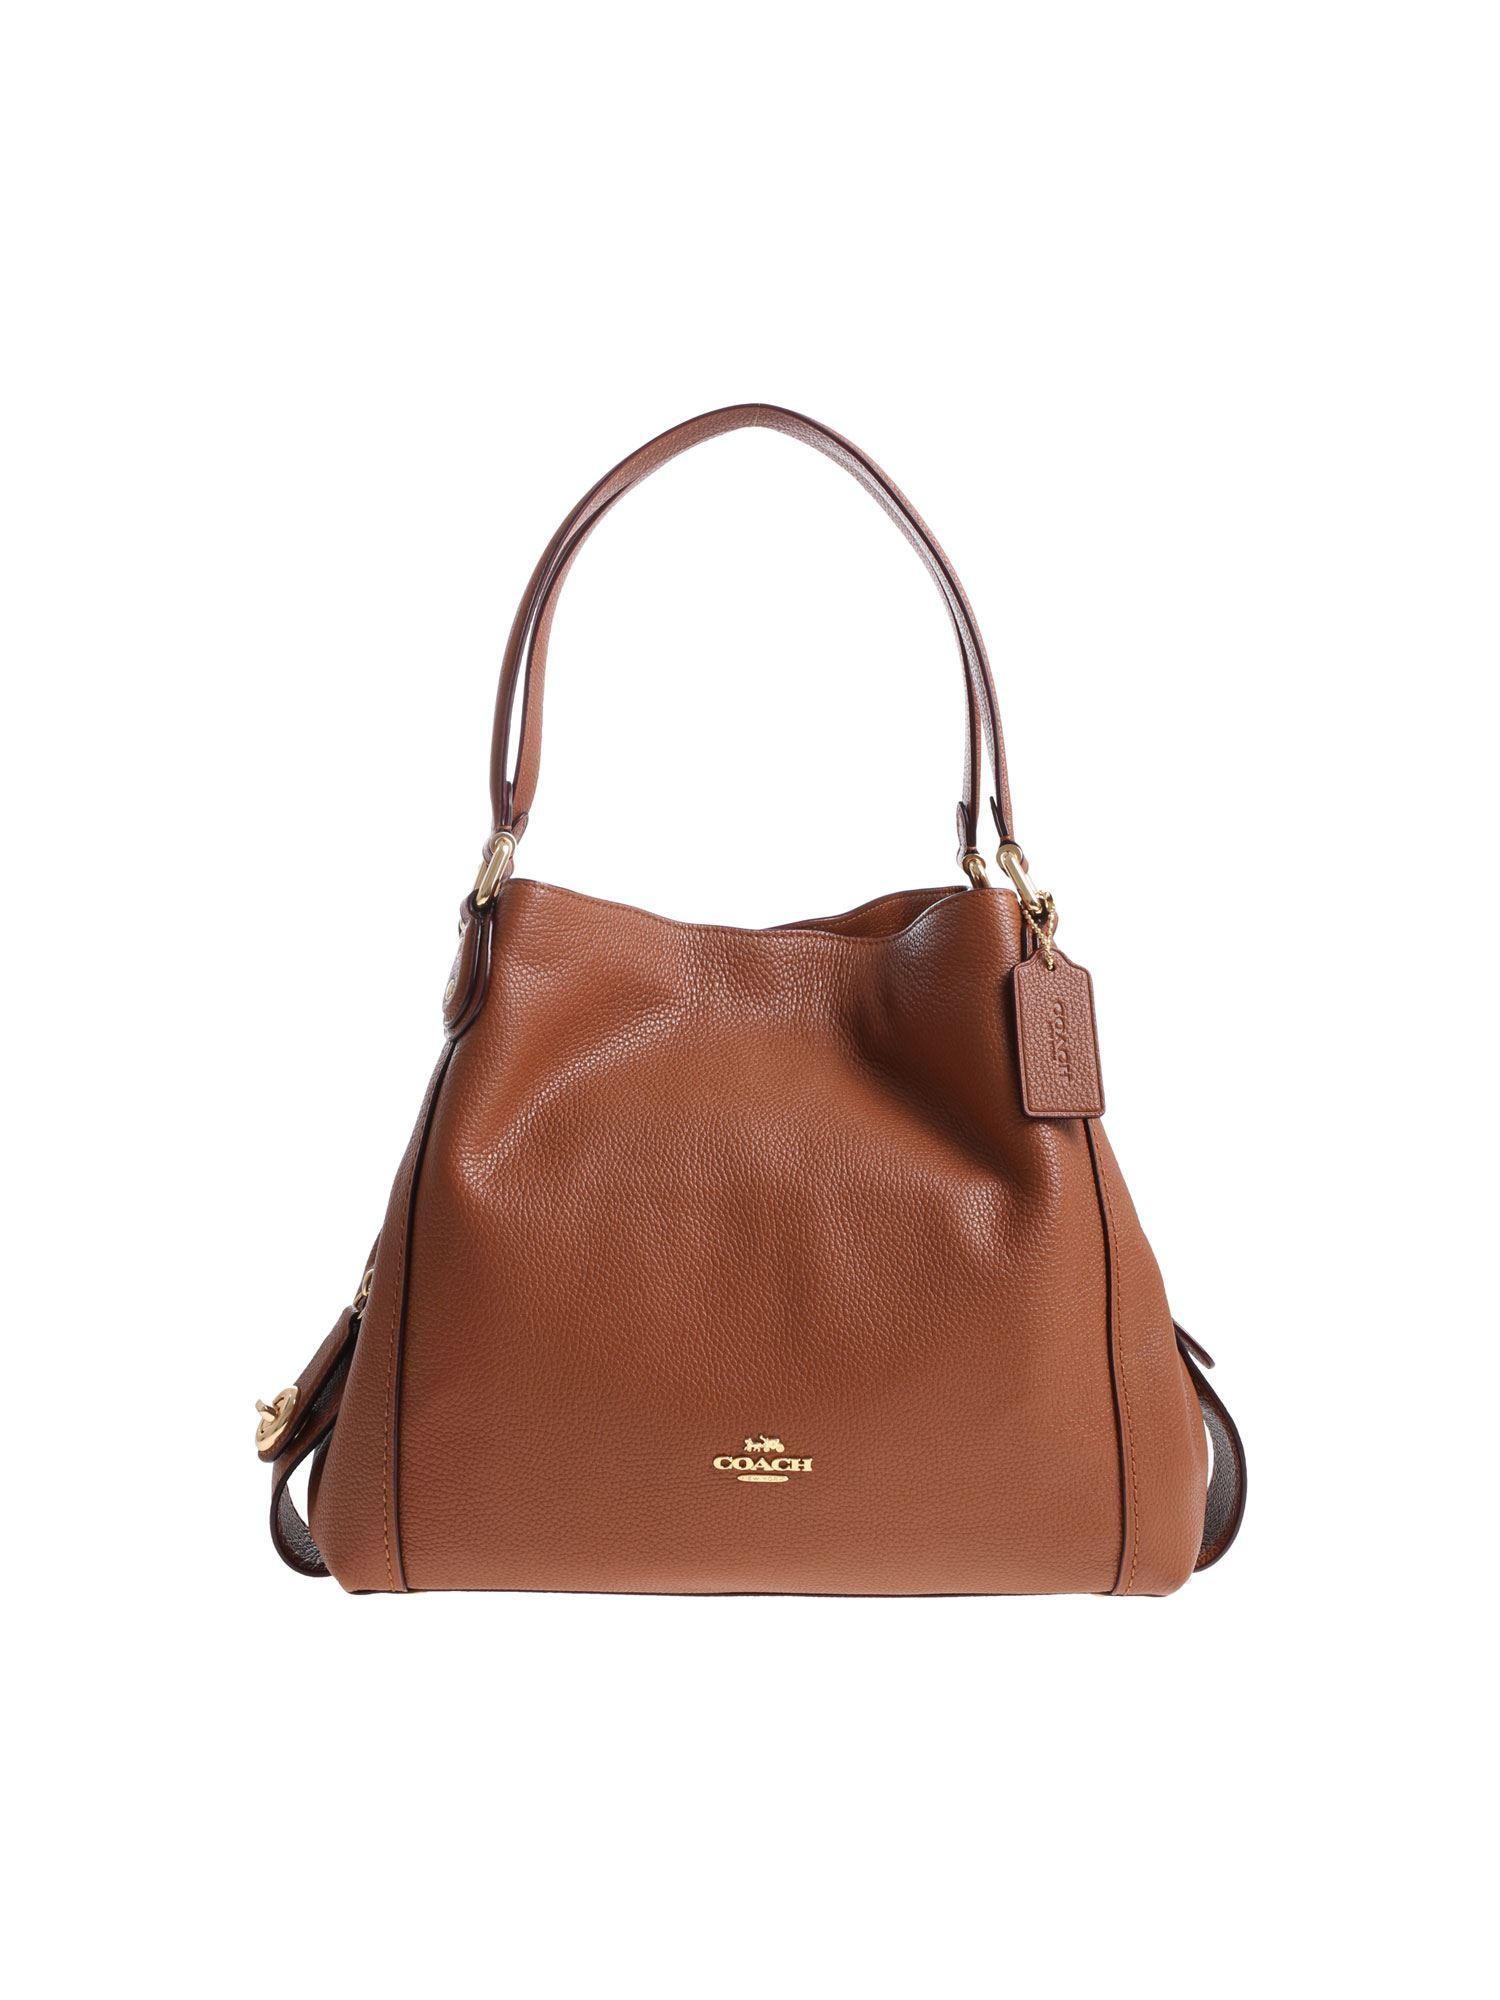 Tan Colored Logo - Lyst - COACH Tan Colored Leather Bag With Golden Logo in Brown